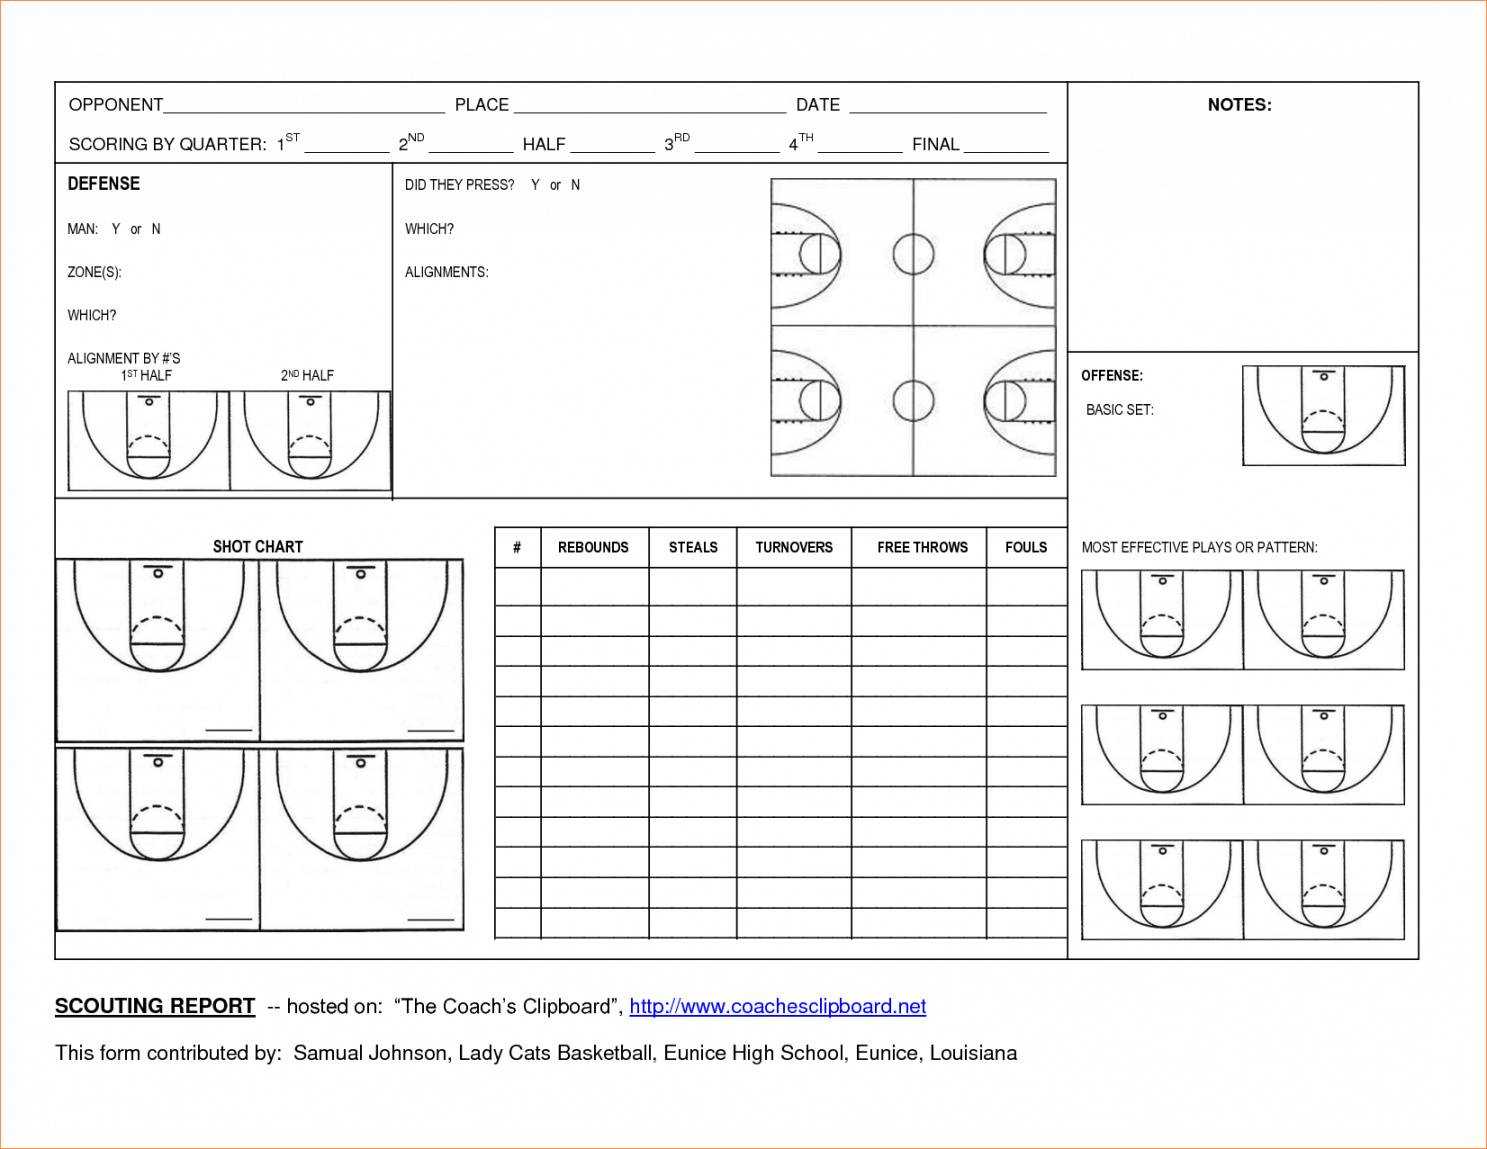 Editable Basketball Scouting Report Template Dltemplates Within Basketball Scouting Report Template